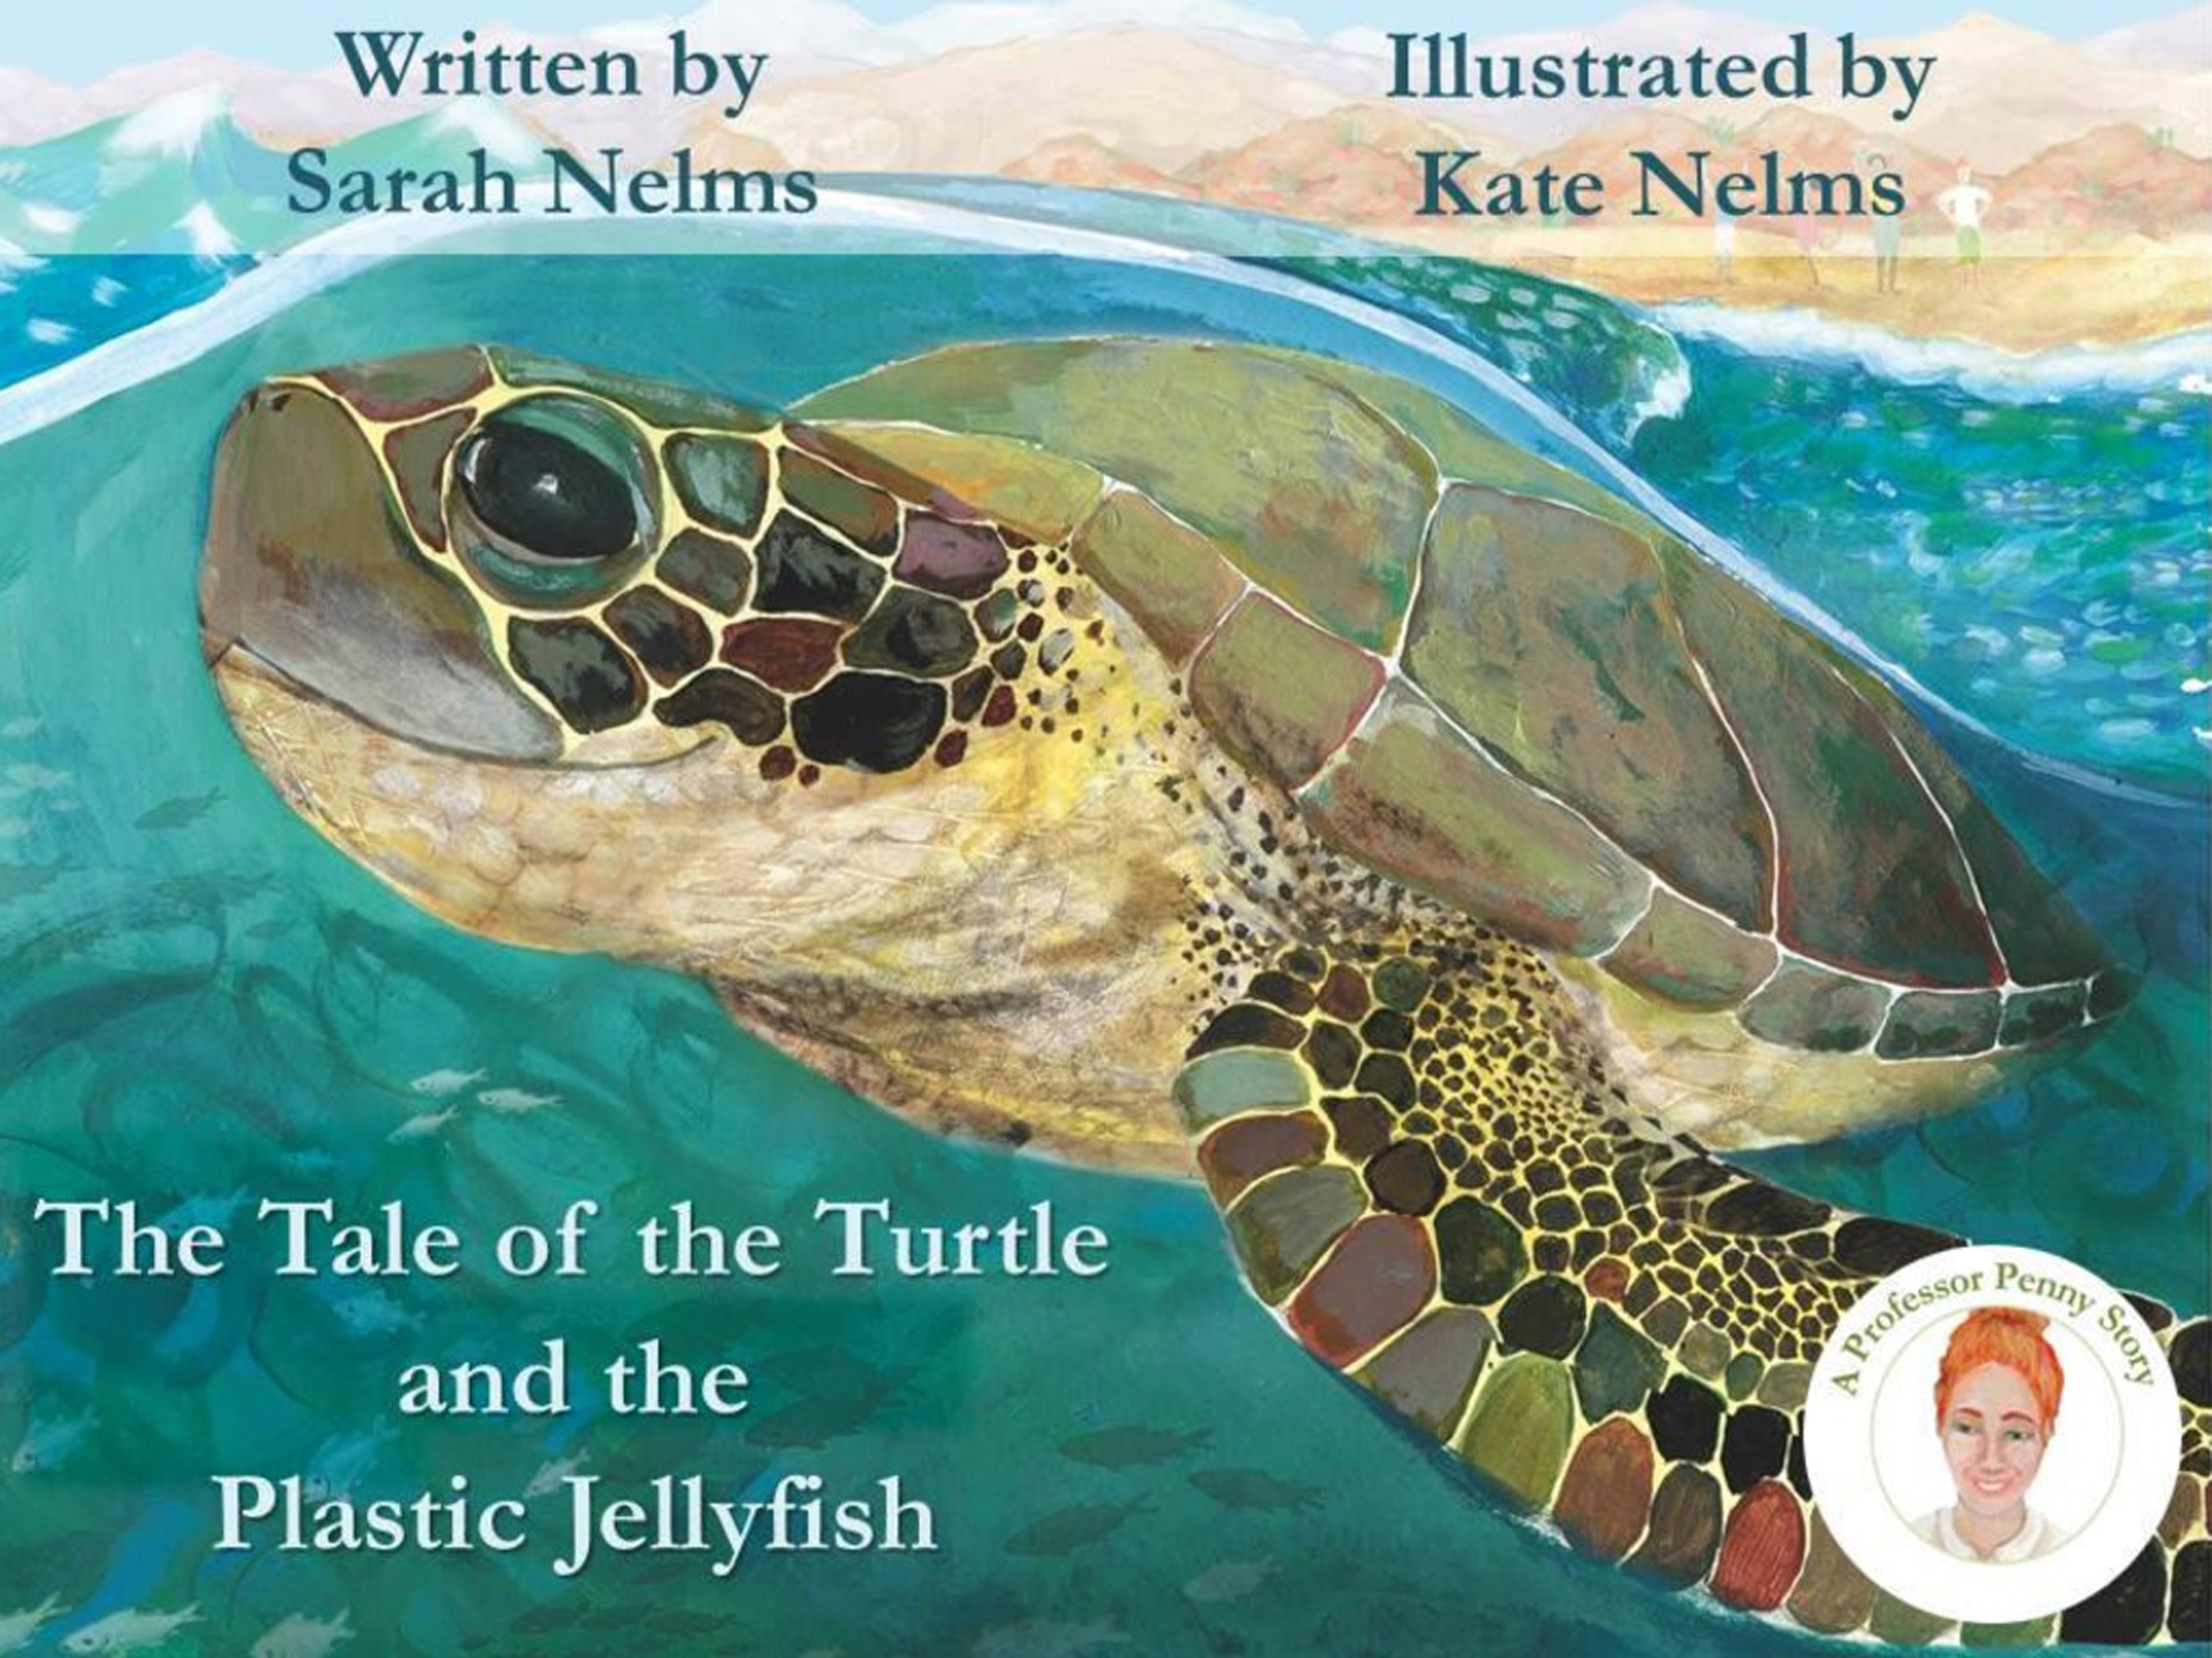 The Tale of the Turtle and the Plastic Jellyfish by Sarah Nelms. 